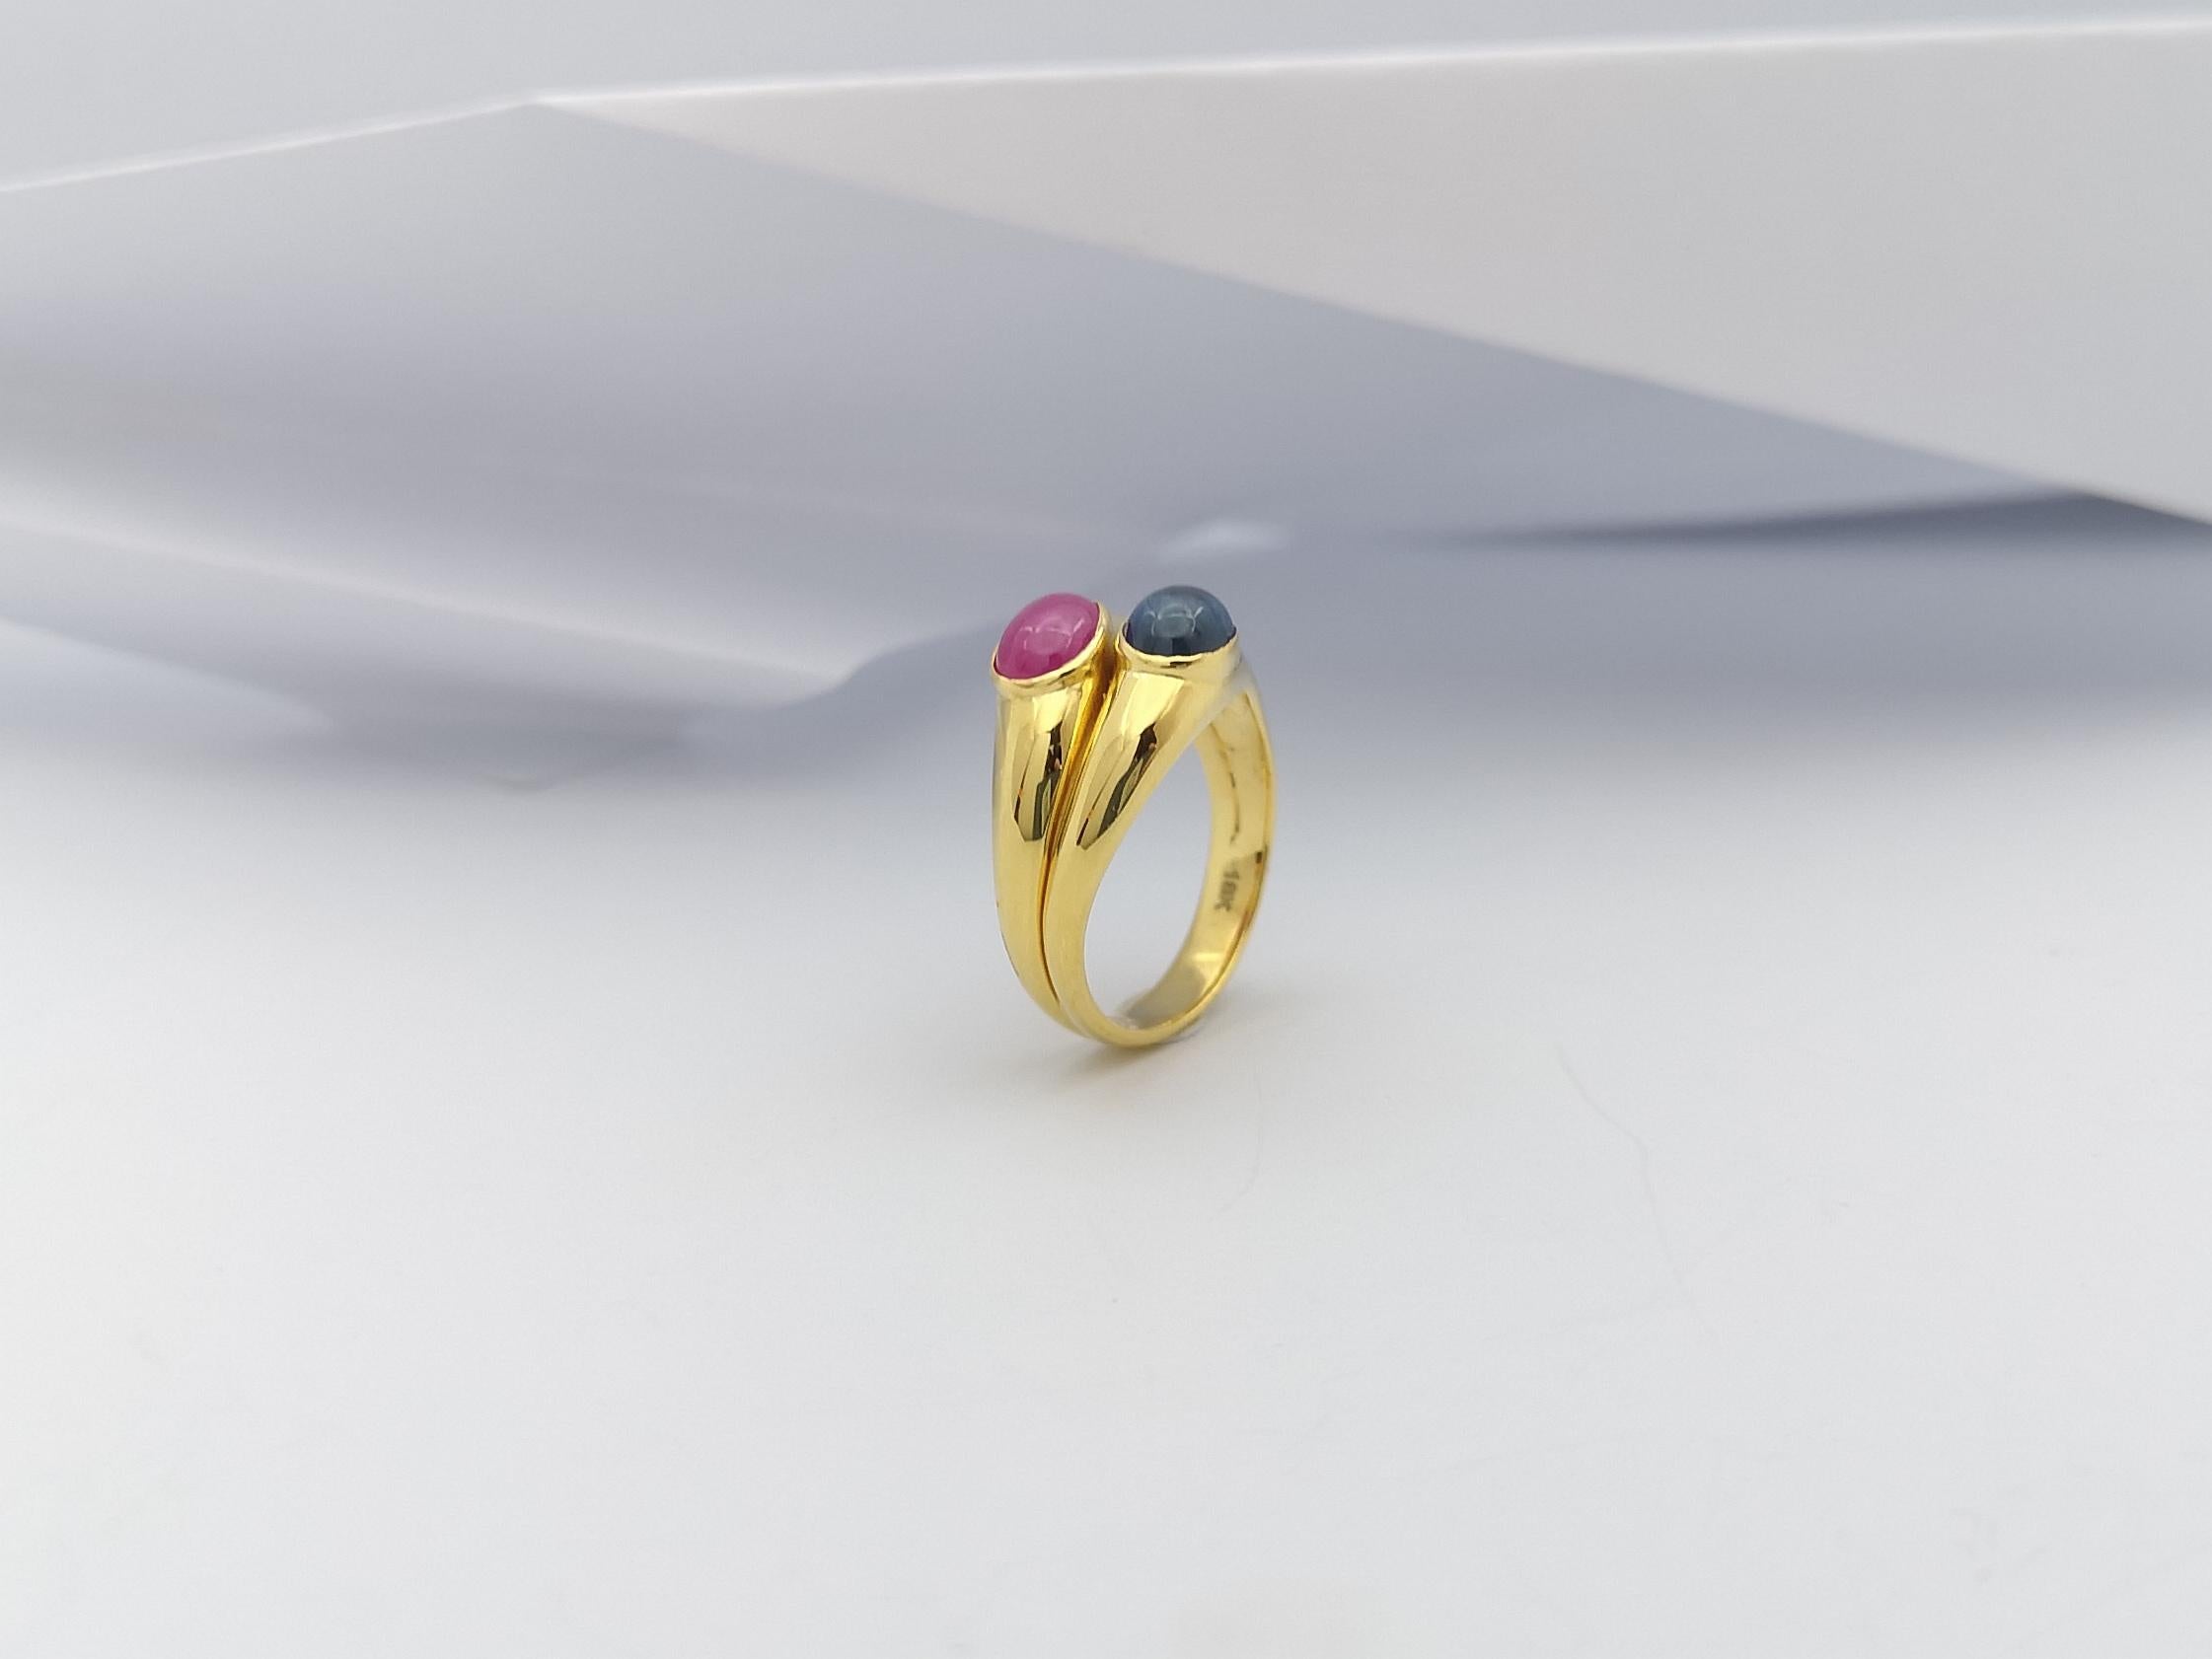 Cabochon Ruby and Cabochon Blue Sapphire Ring Set in 18 Karat Gold Settings For Sale 7